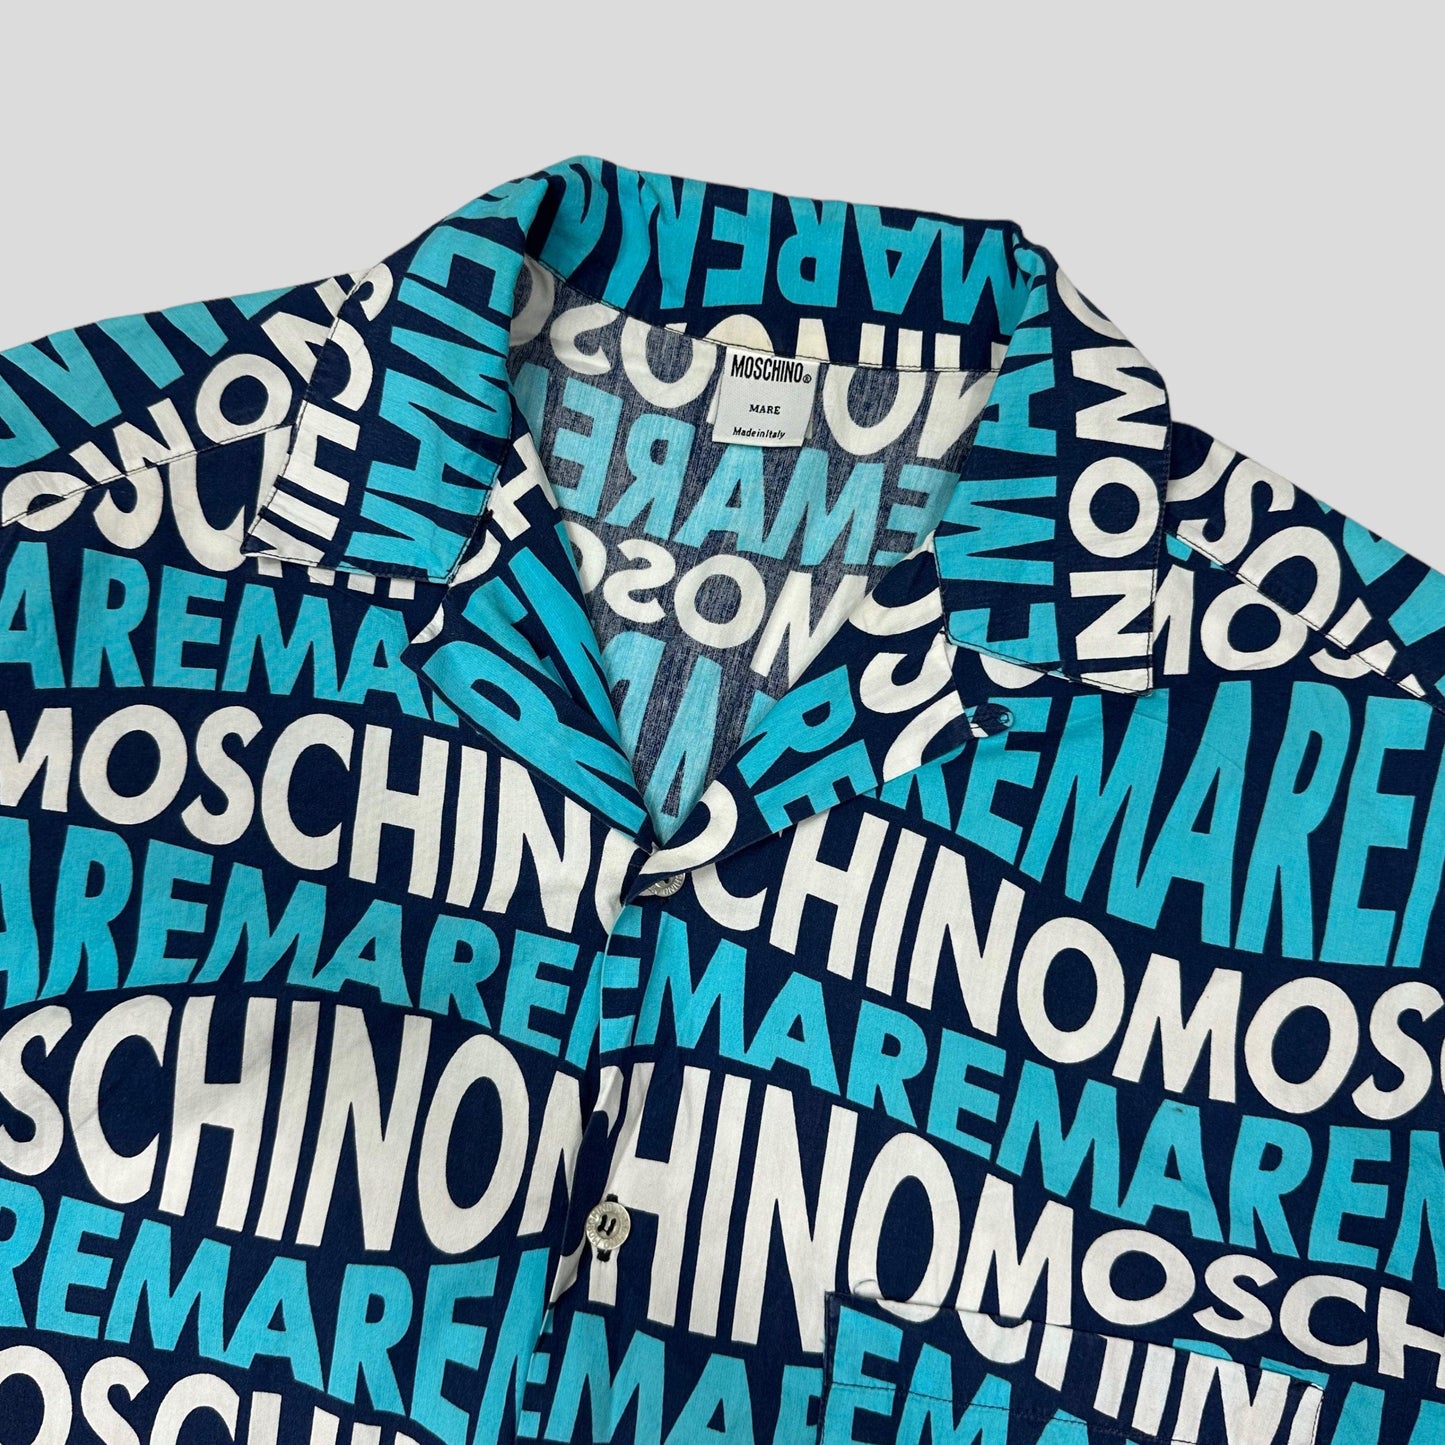 Moschino Mare 90’s Spellout Set - L/XL - Known Source